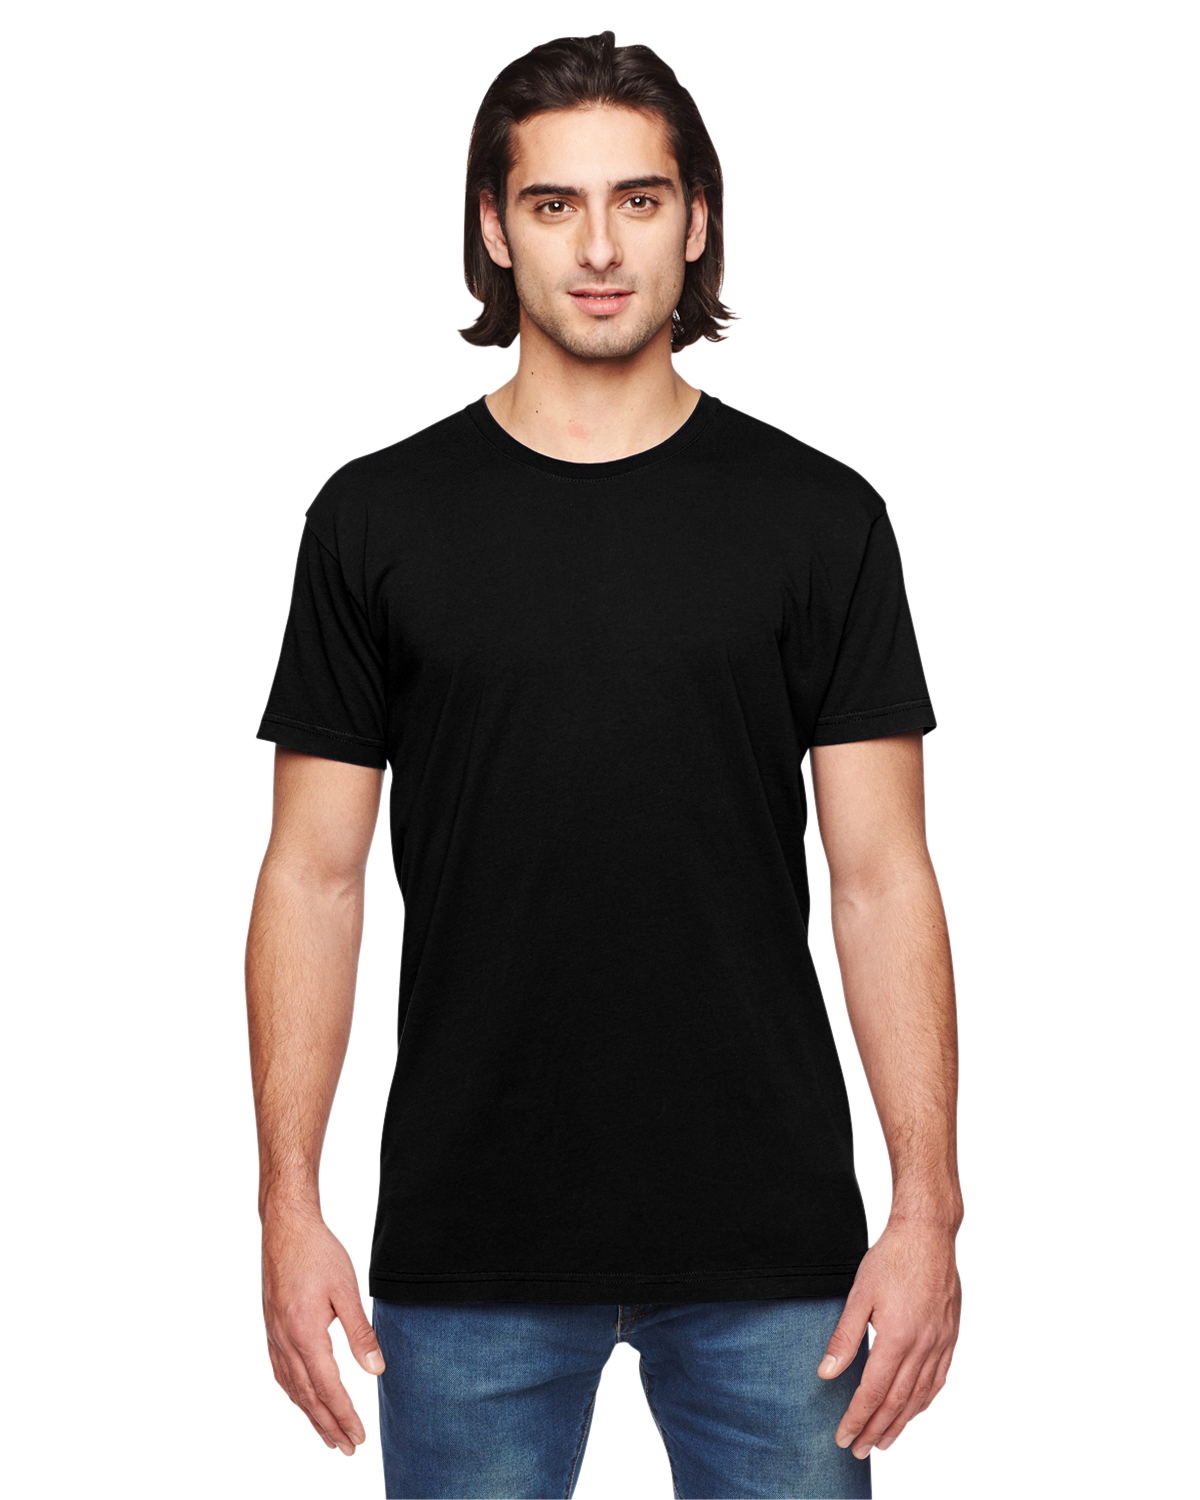 American Apparel 2011W - Unisex Power Washed T-Shirt $10.32